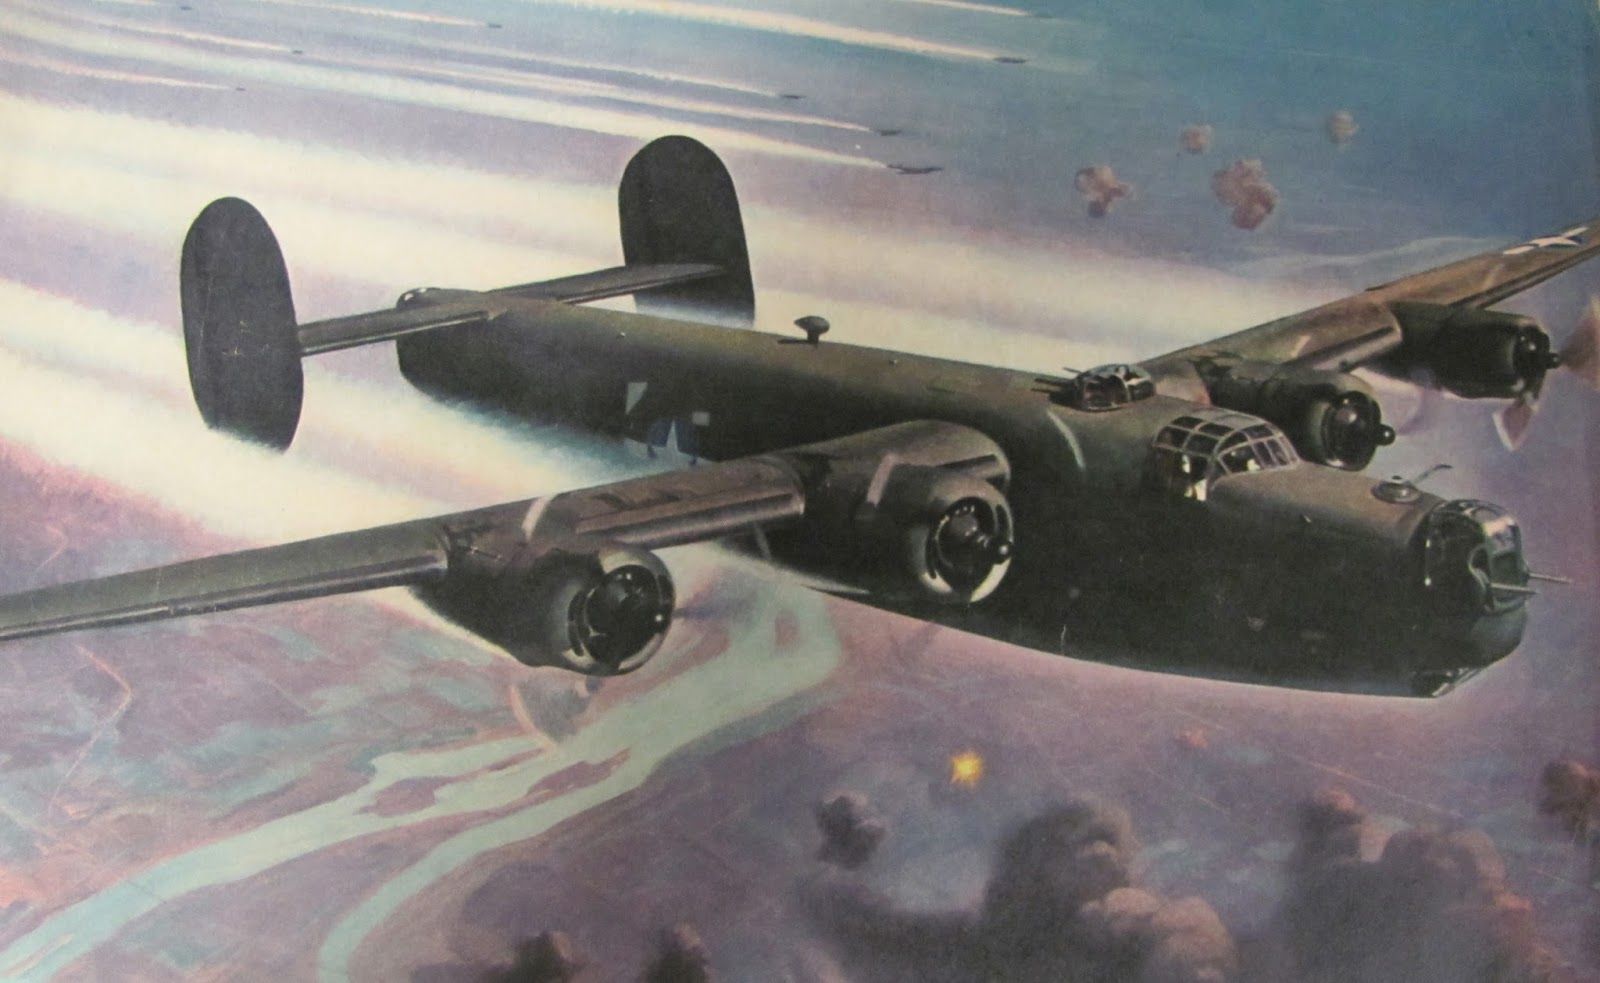 Consolidated B 24 Liberator Wallpaper, Military, HQ Consolidated B 24 Liberator PictureK Wallpaper 2019